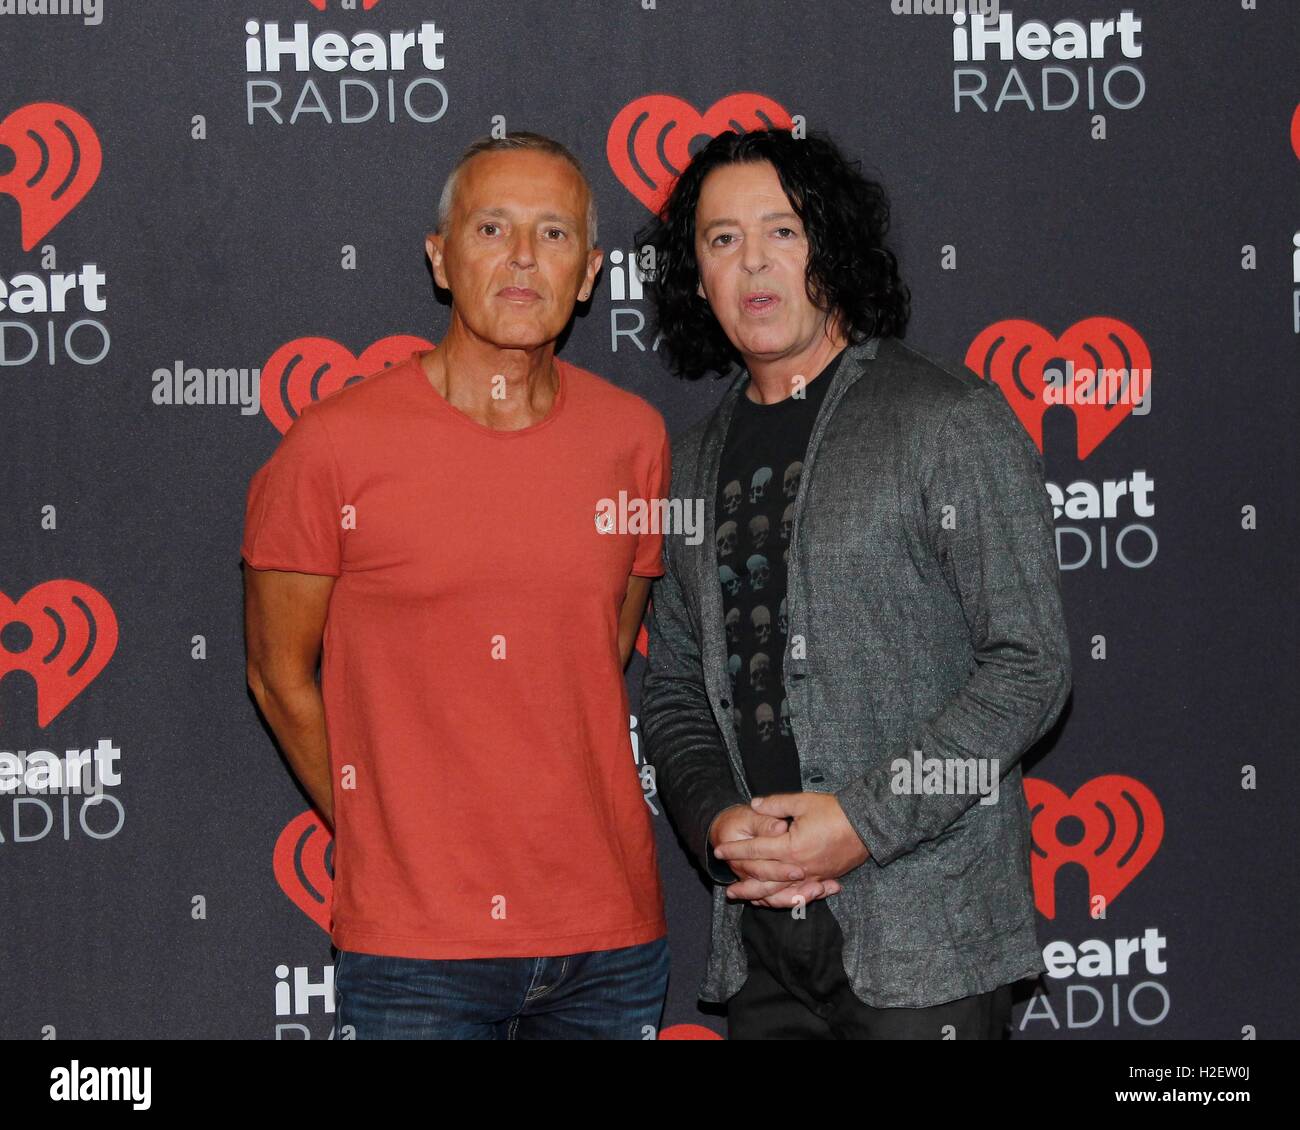 Las Vegas, NV, USA. 24th Sep, 2016. Curt Smith, Roland Orzabal of Tears for Fears at arrivals for 2016 iHeartRadio Music Festival - SAT 4, T-Mobile Arena, Las Vegas, NV September 24, 2016. © James Atoa/Everett Collection/Alamy Live News Stock Photo